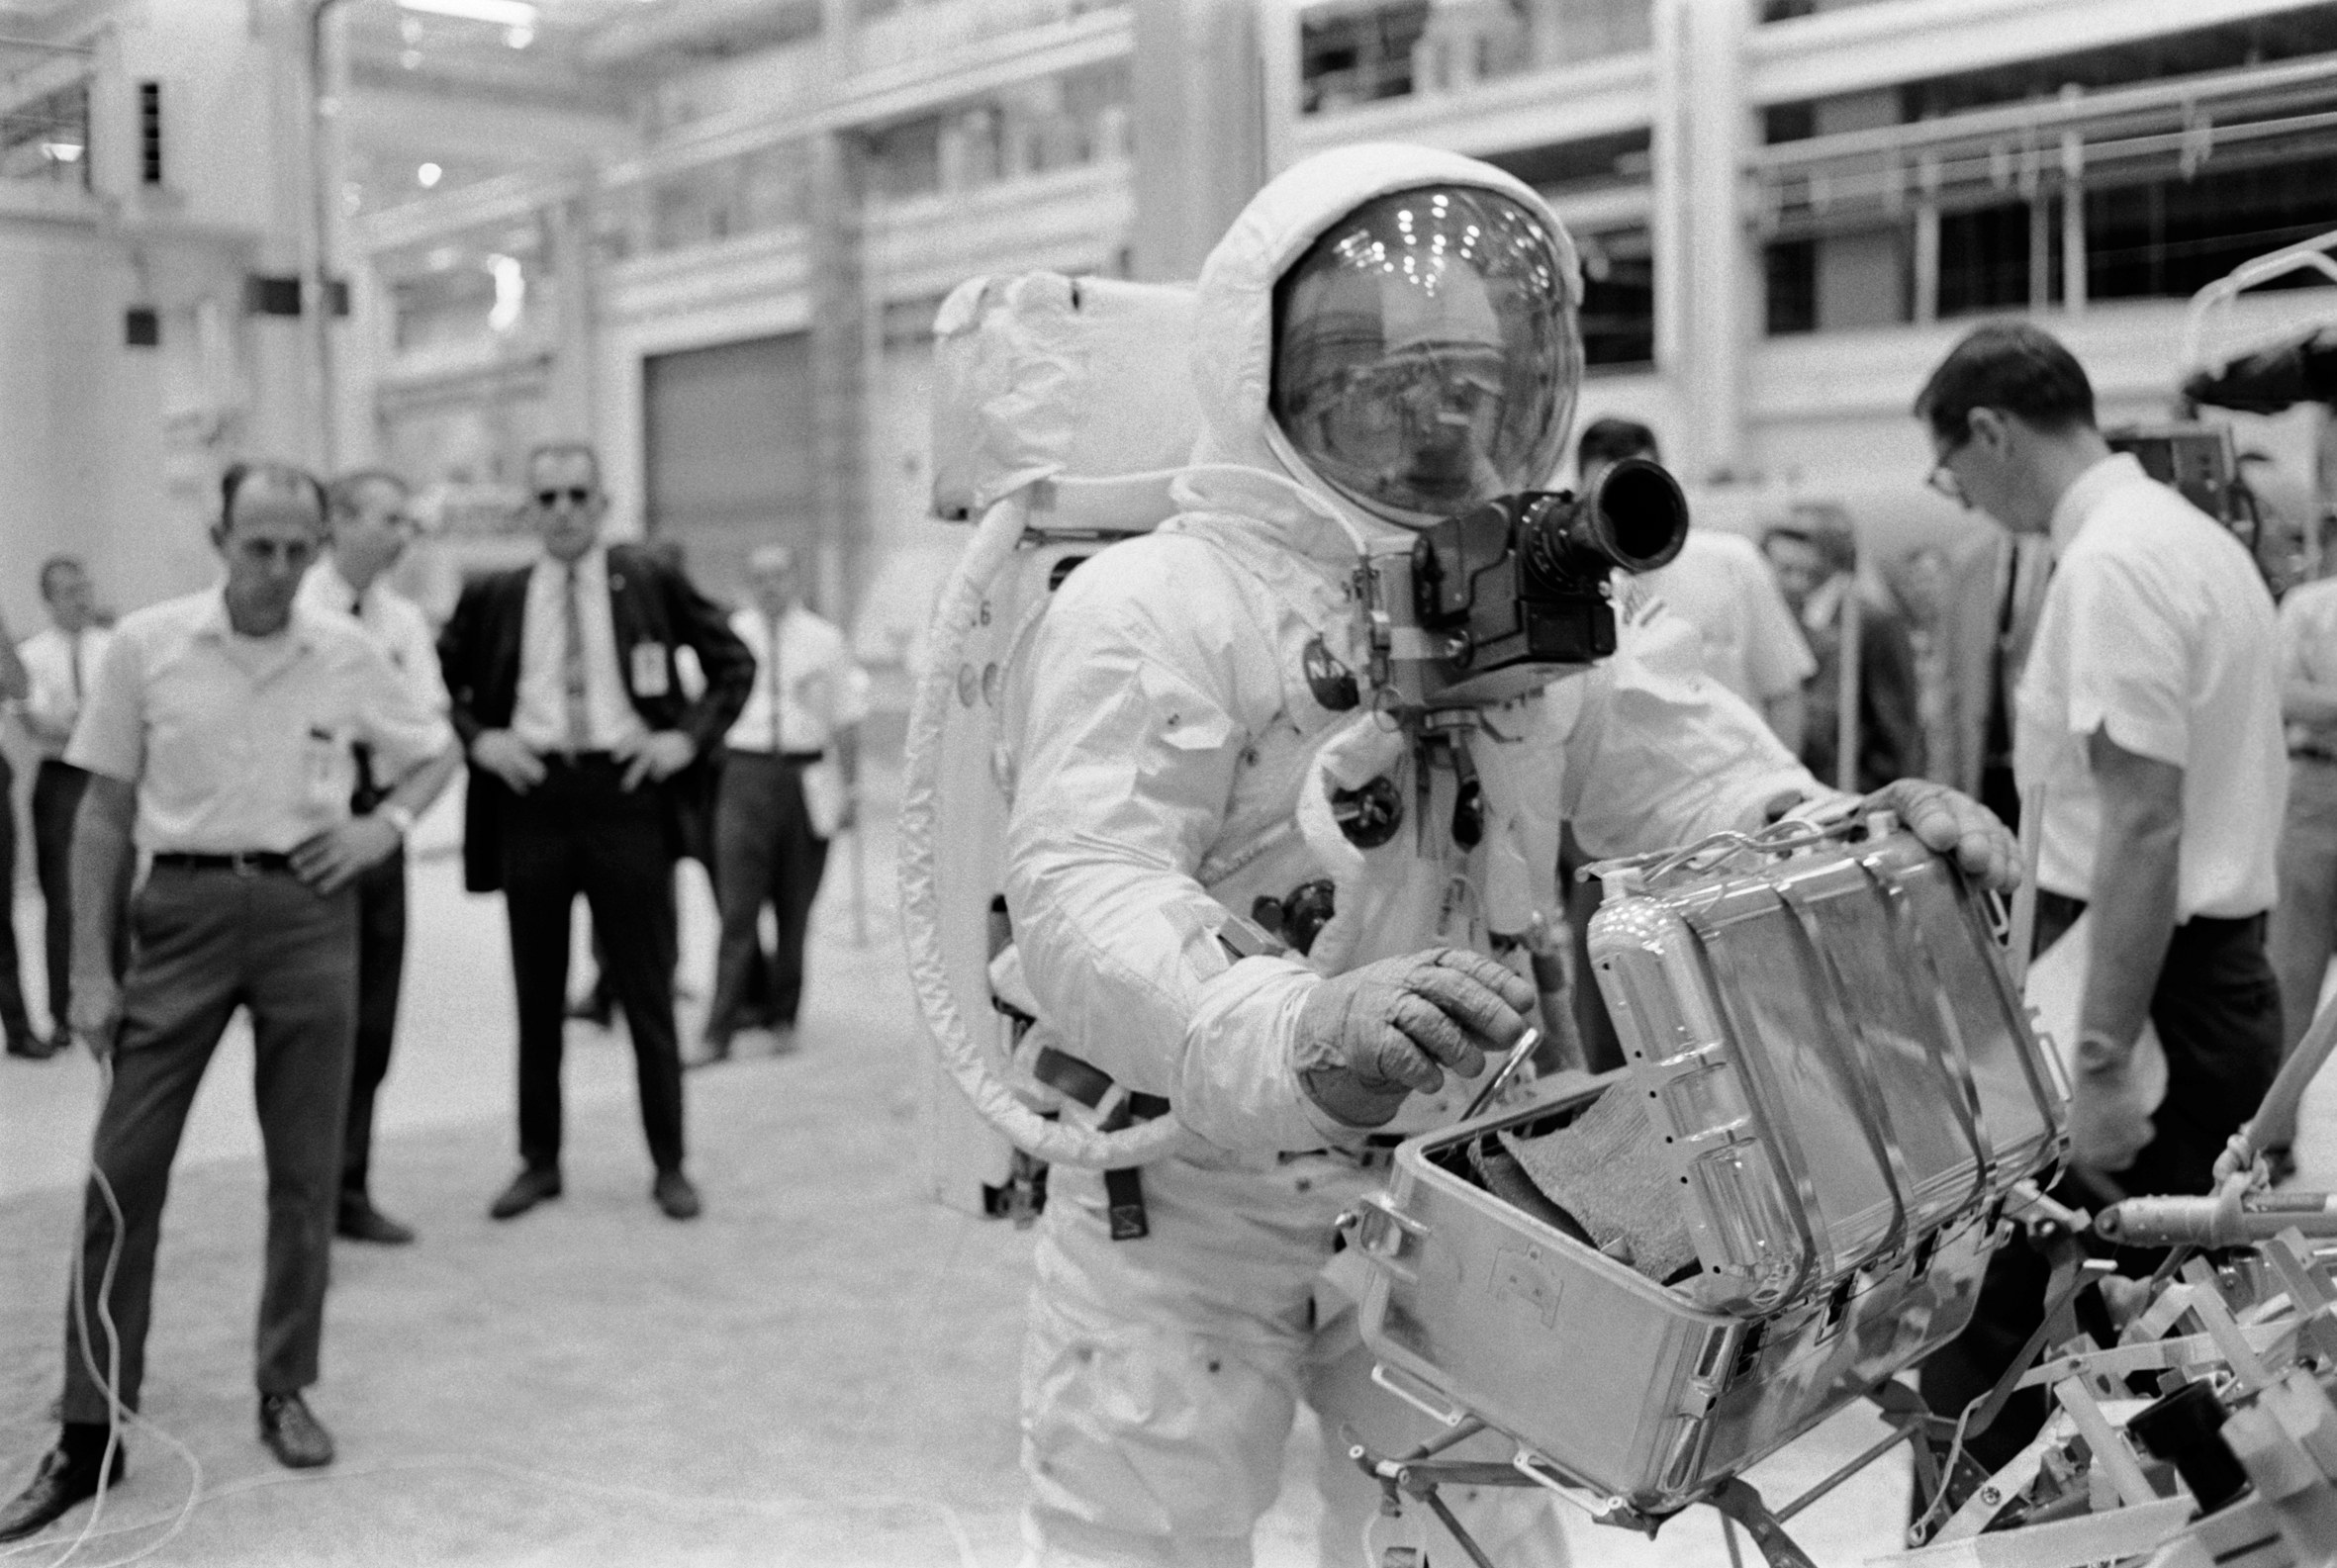 Astronaut Buzz Aldrin pictured during extravehicular activity training in April 1969.